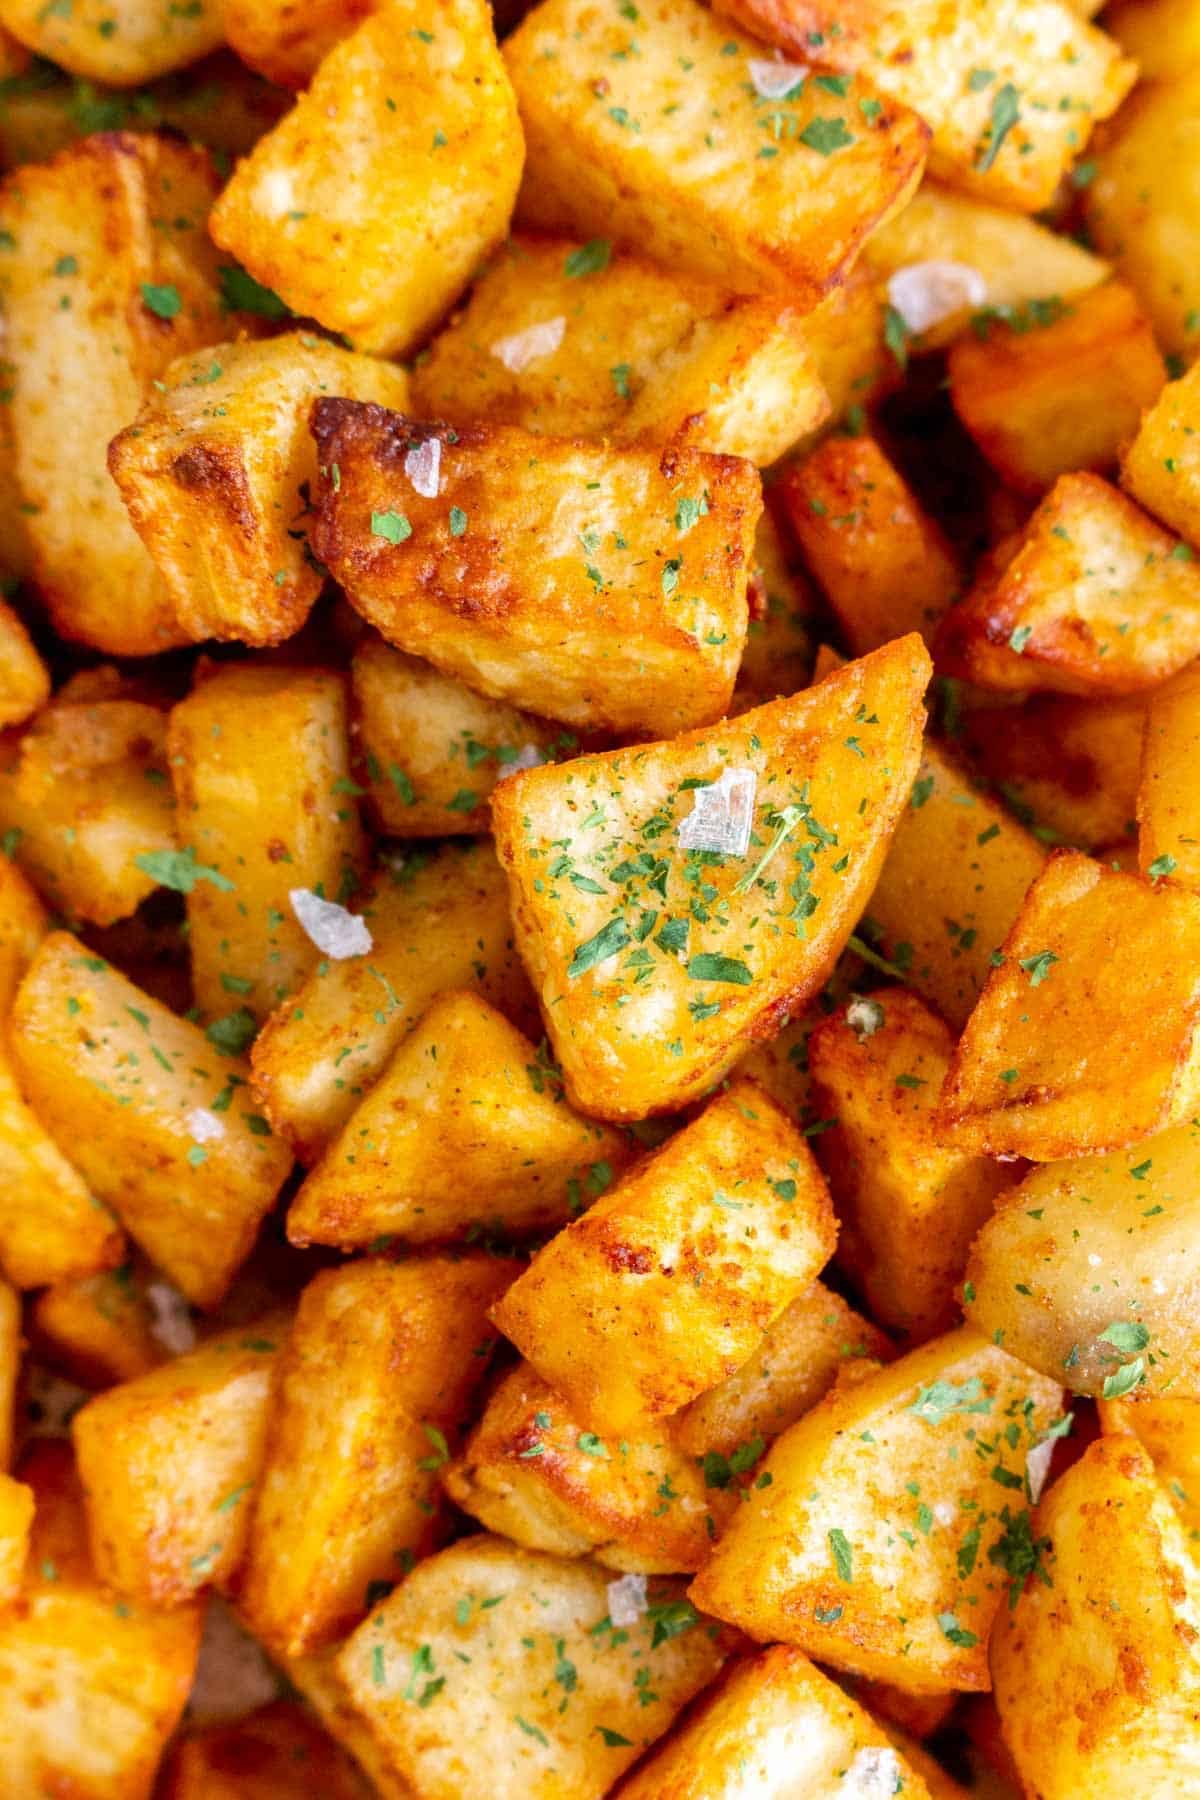 A close view of air fryer breakfast potatoes with parsley and salt flakes.